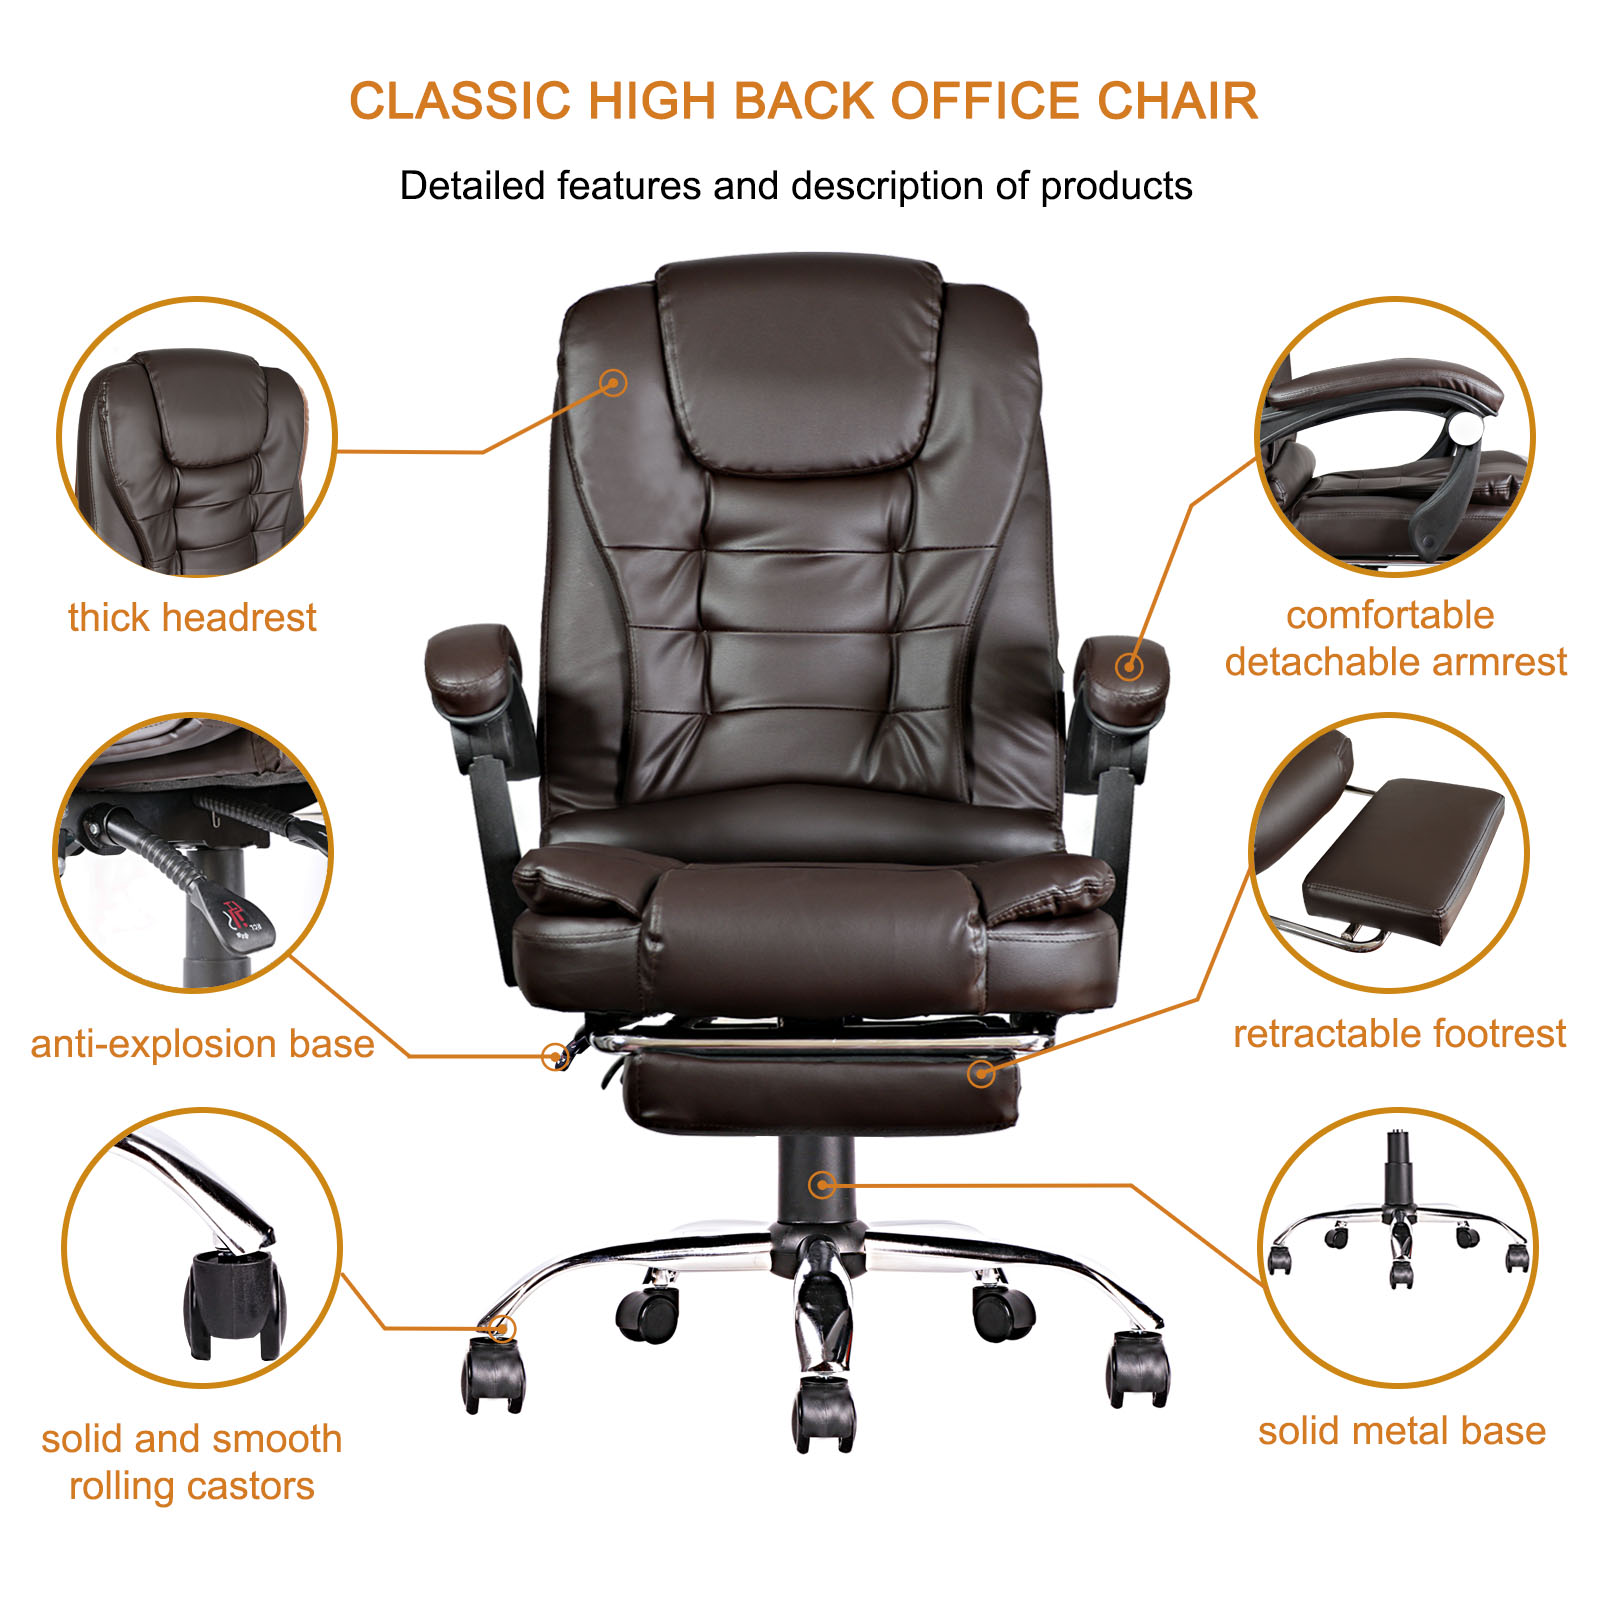 High Back Office Chair, Adjustable Ergonomic Office Chair, Executive PU  Leather | eBay